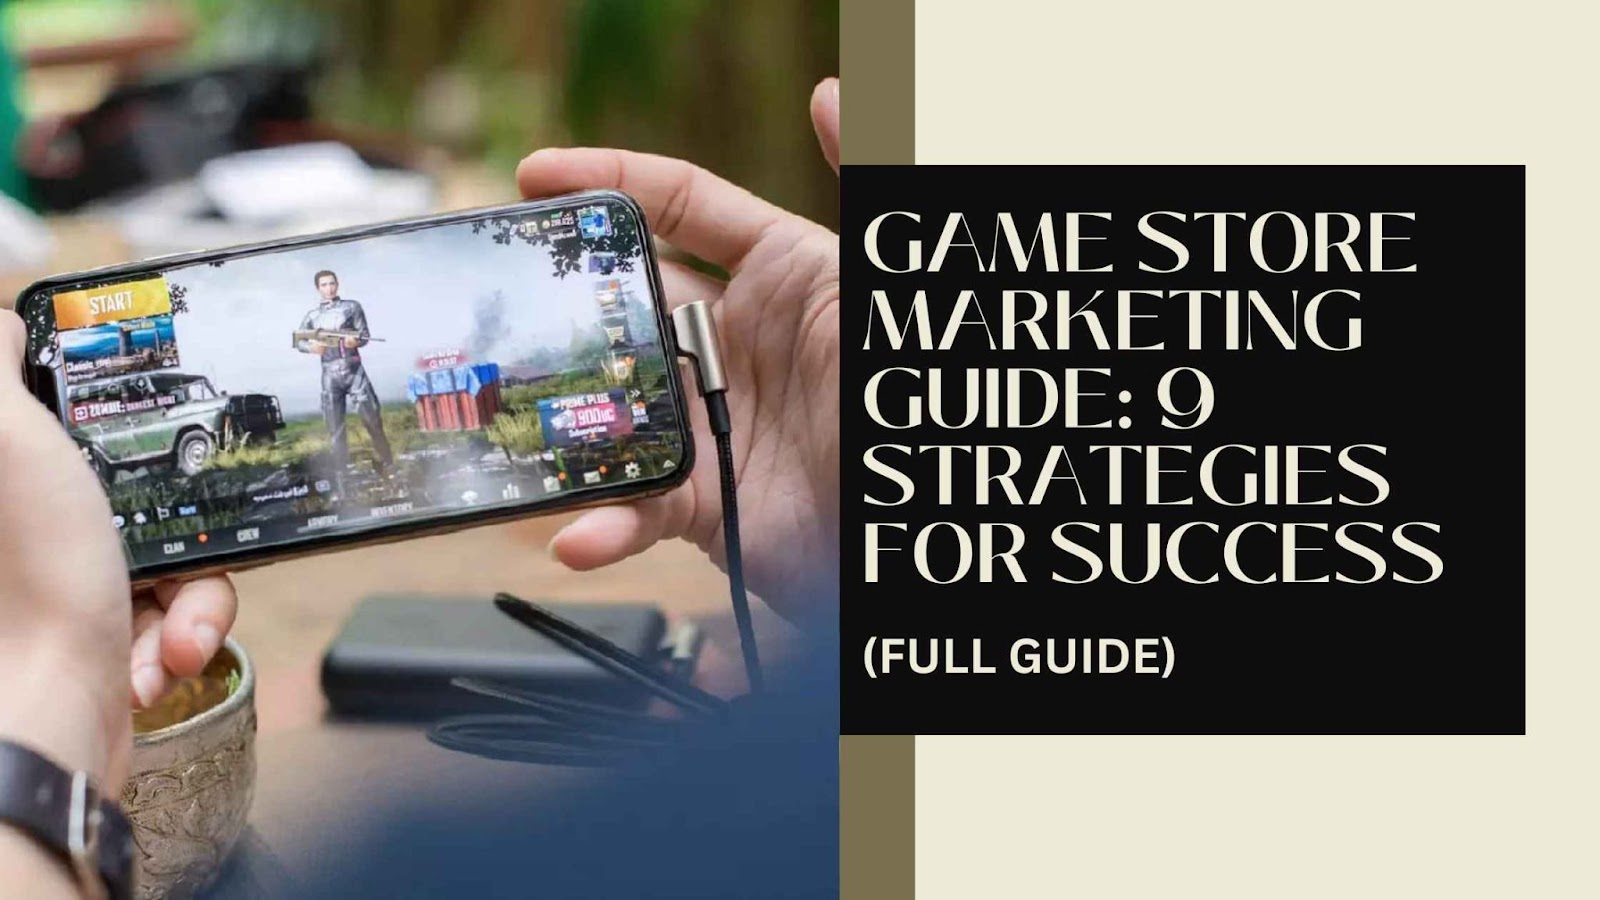 Discover how to make your game store thrive with these 9 game store marketing strategies. Boost visibility, drive sales, and engage with your community.